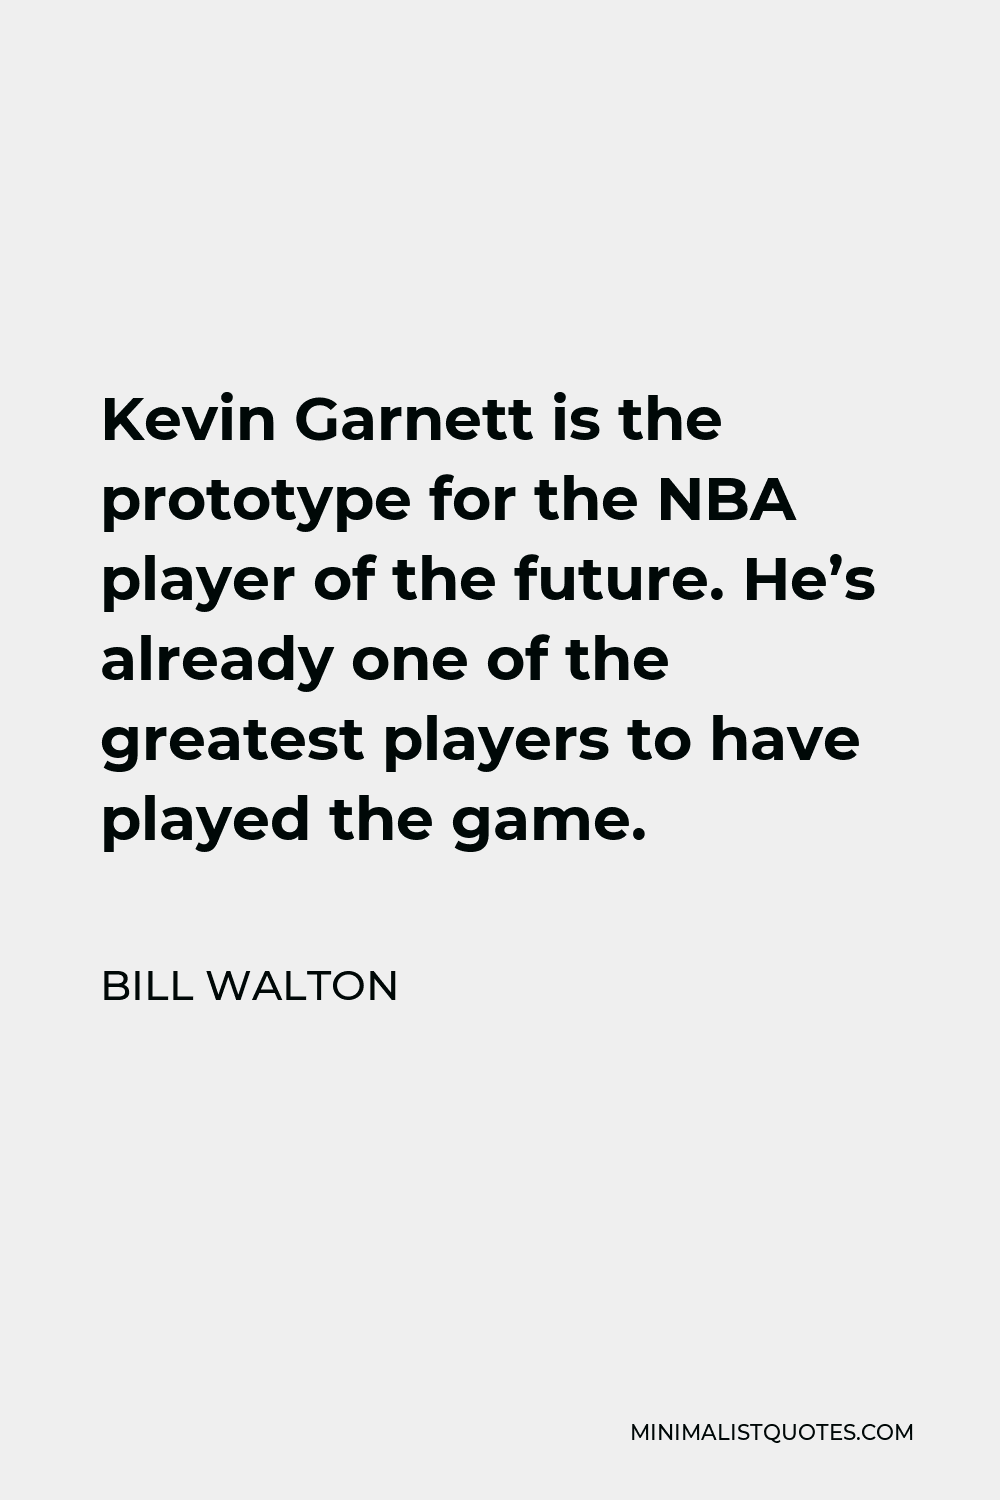 Bill Walton Quote - Kevin Garnett is the prototype for the NBA player of the future. He’s already one of the greatest players to have played the game.